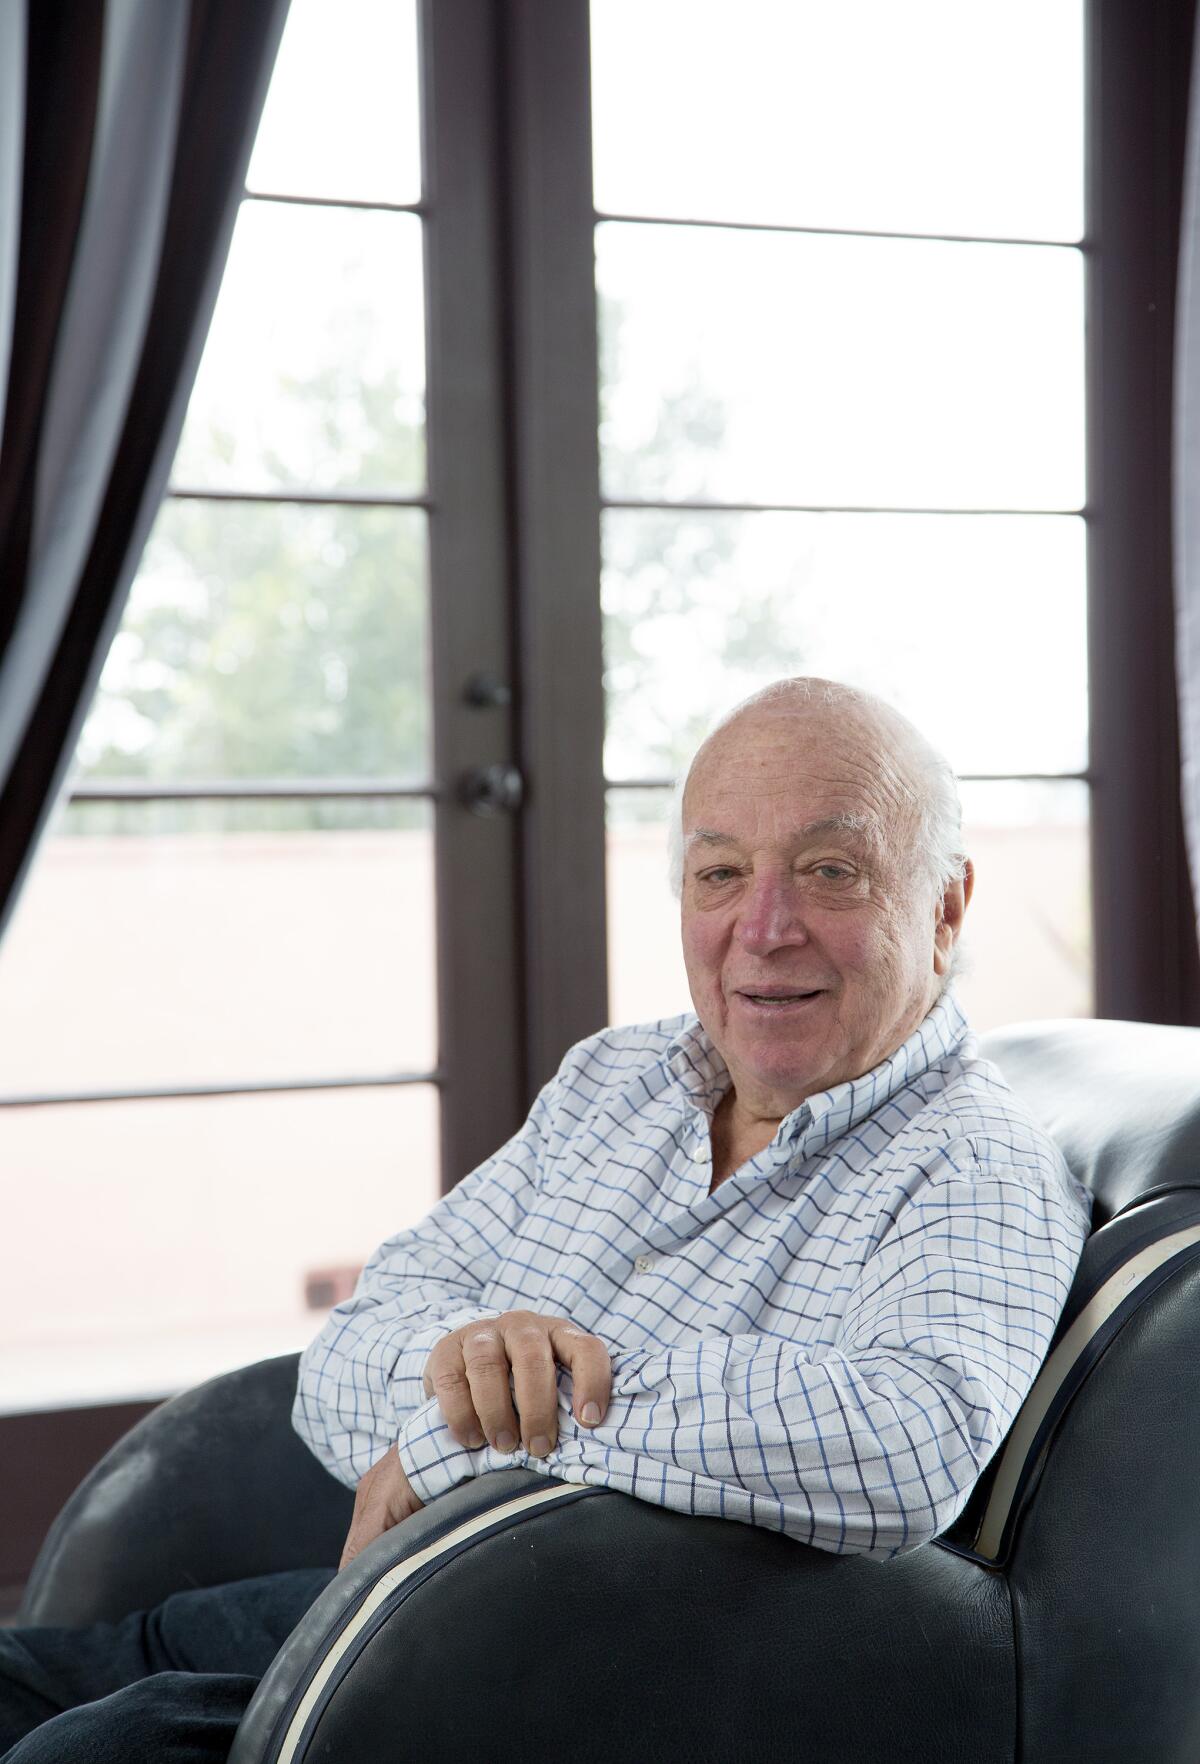 Seymour Stein sits in a chair and smiles